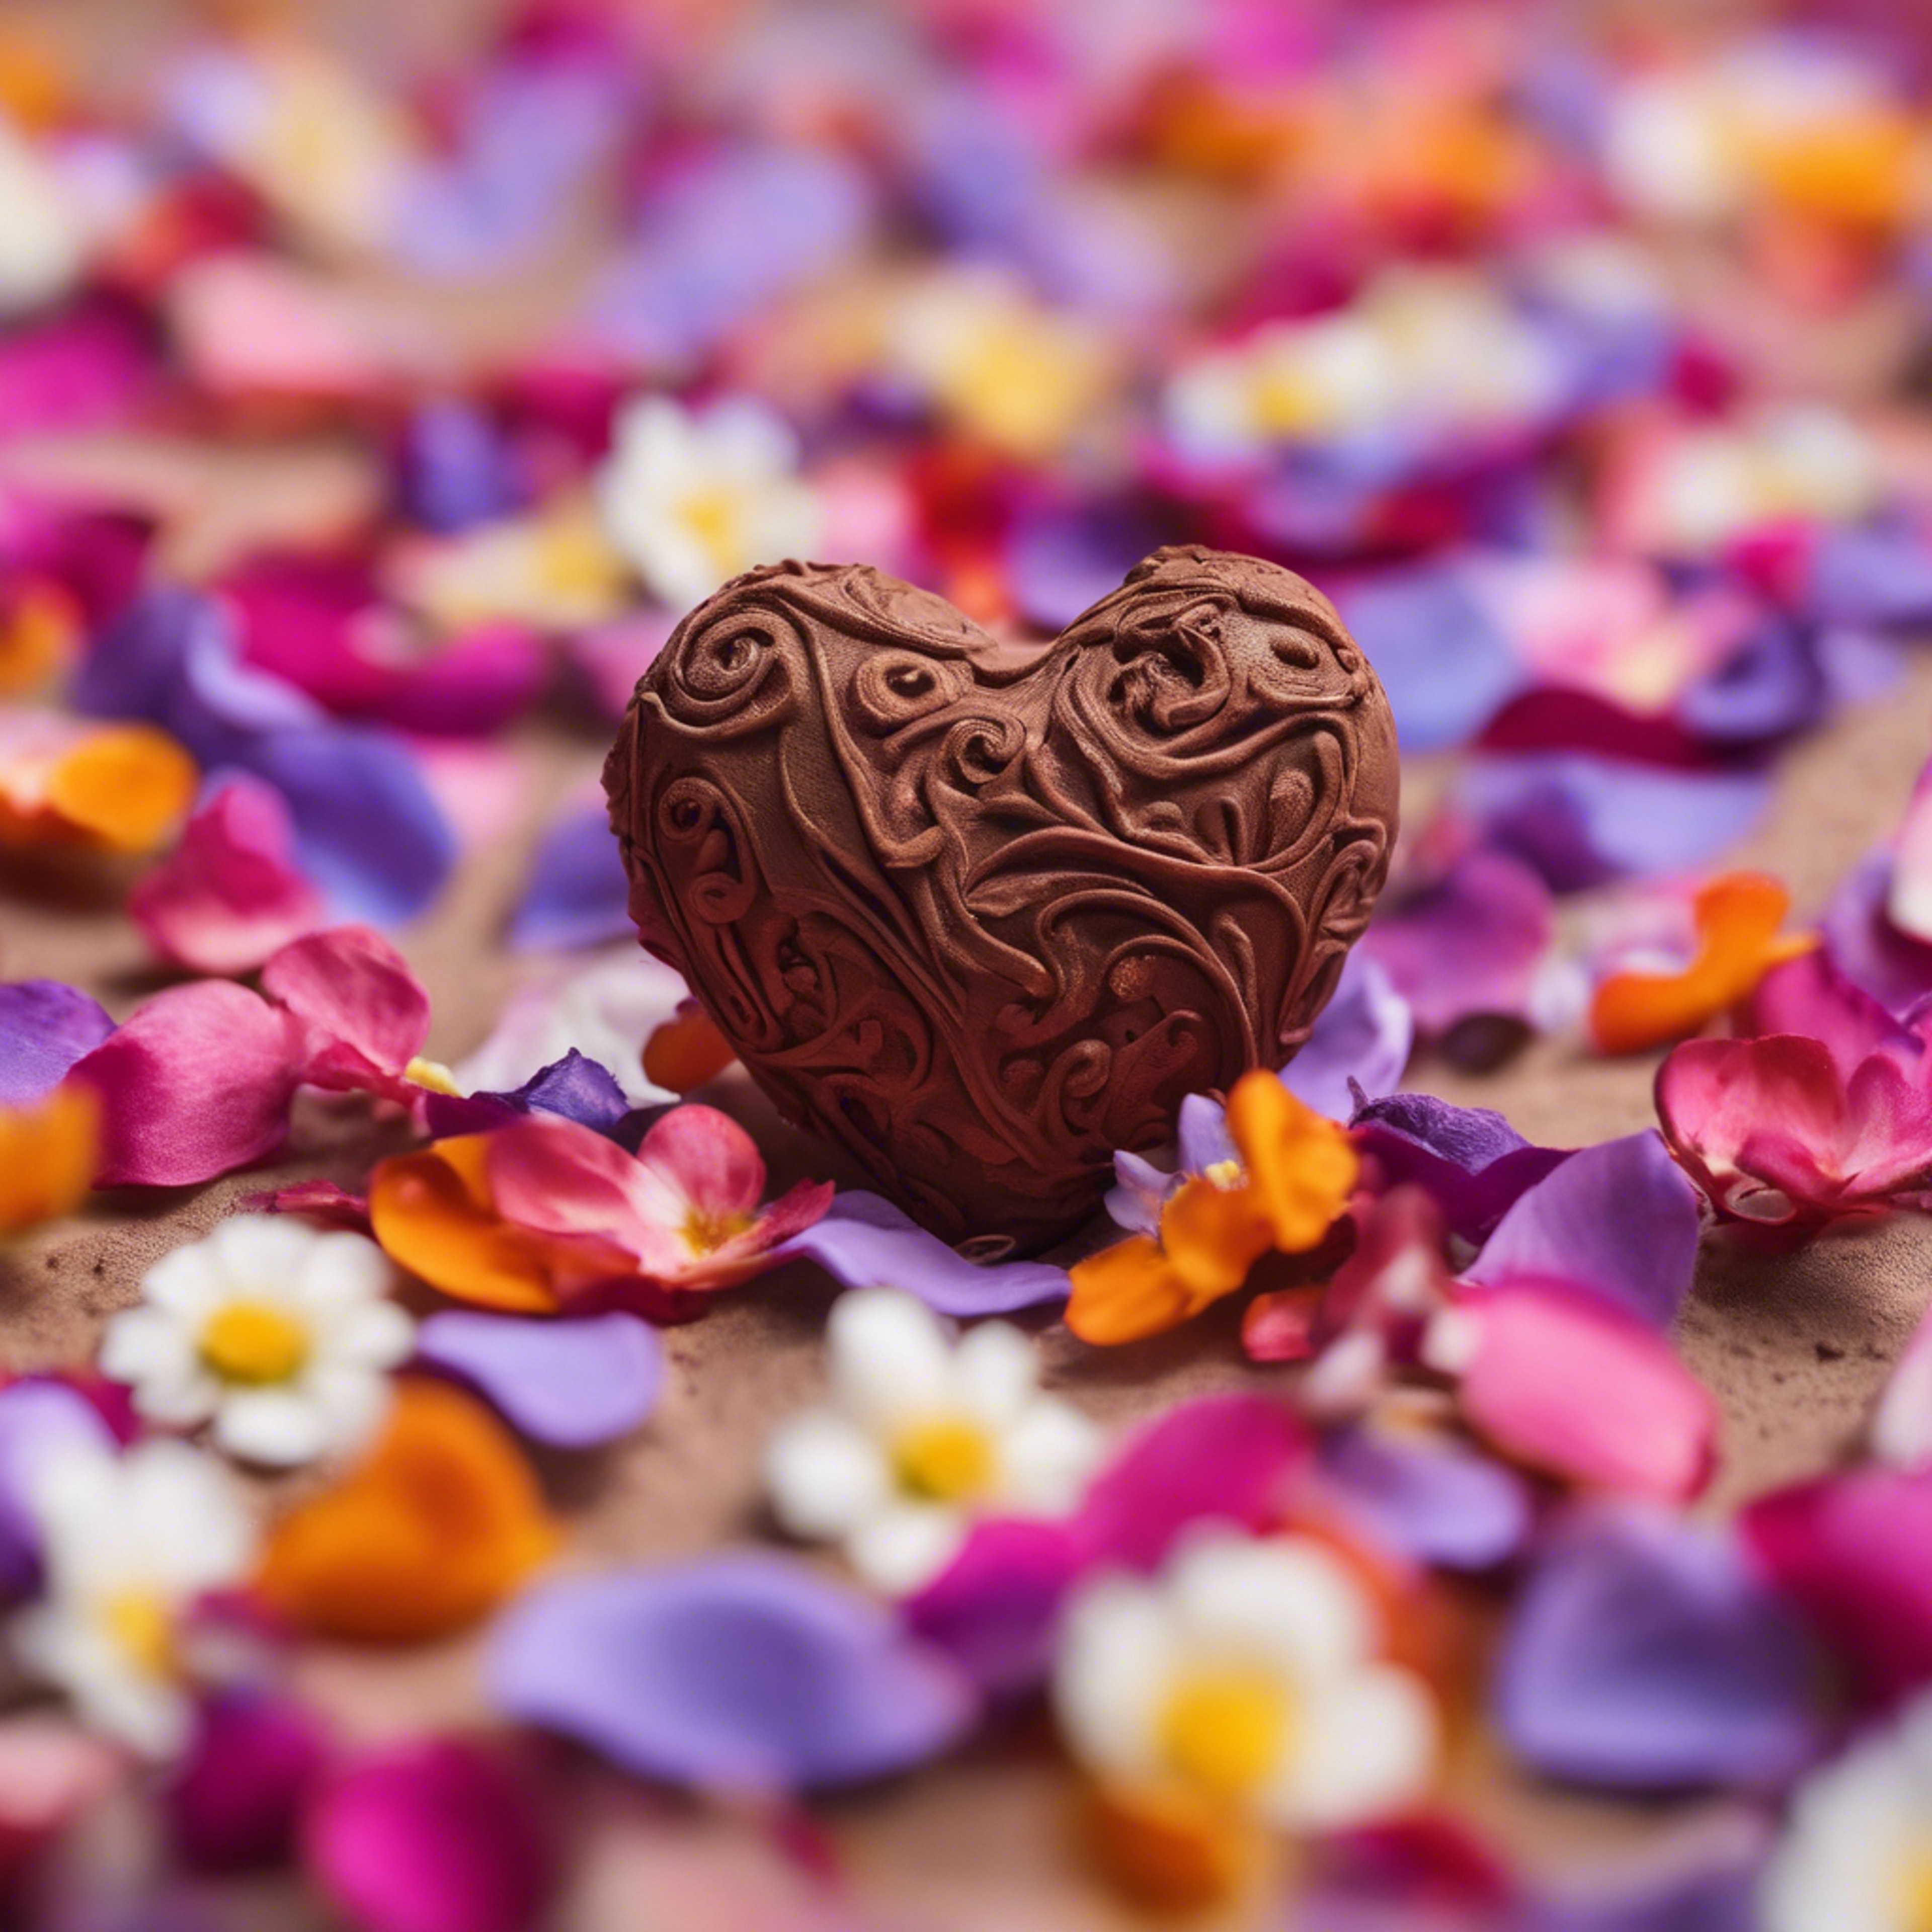 A miniature brown clay heart nestled among vibrant flower petals.壁紙[a581c980eb05453f8c4e]